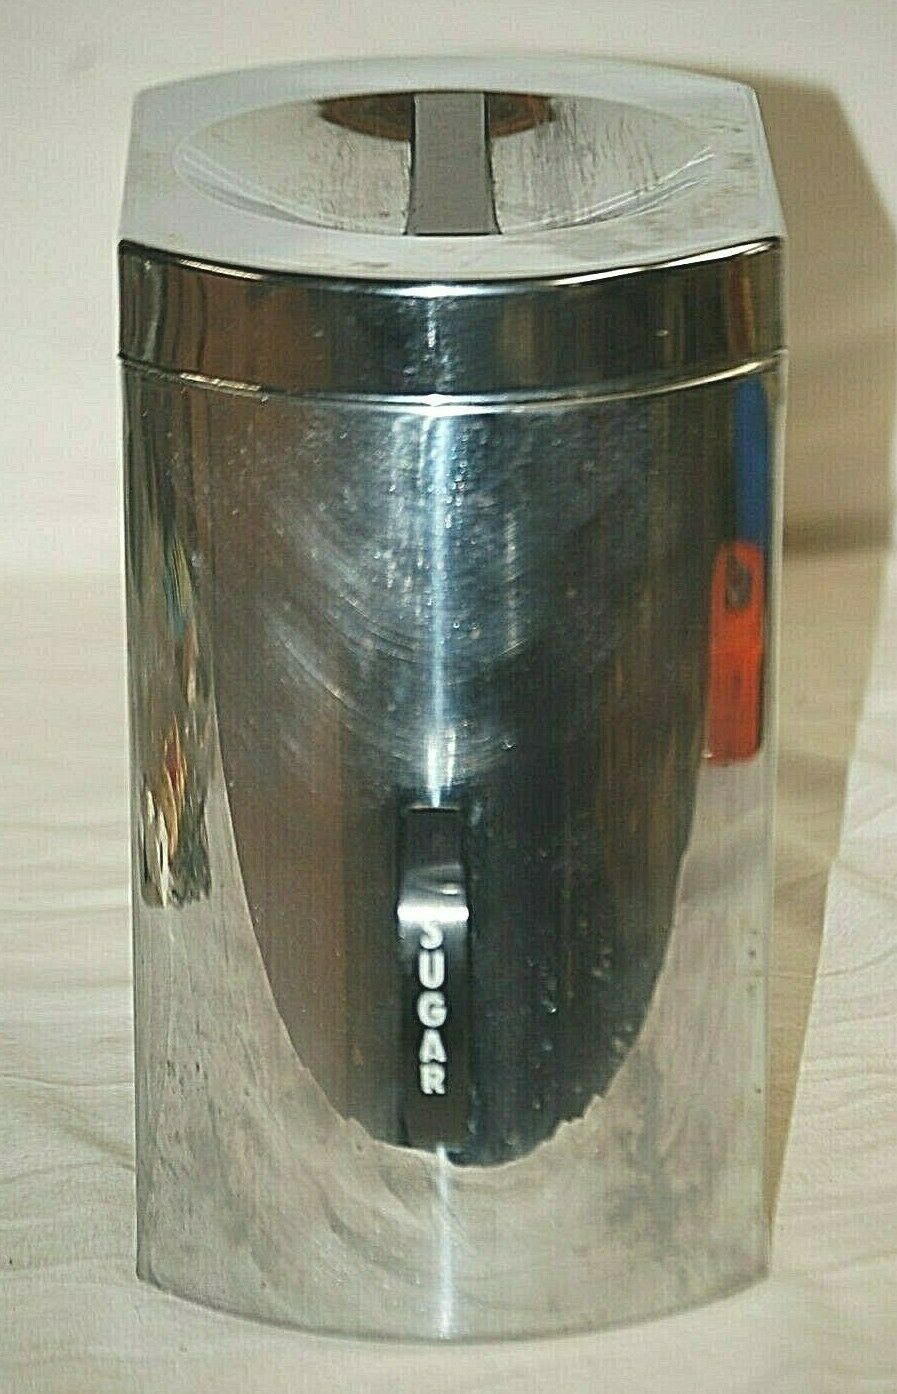 Kromex Metal Sugar Canister Kitchen Ware Container Vintage MCM USA - $39.59